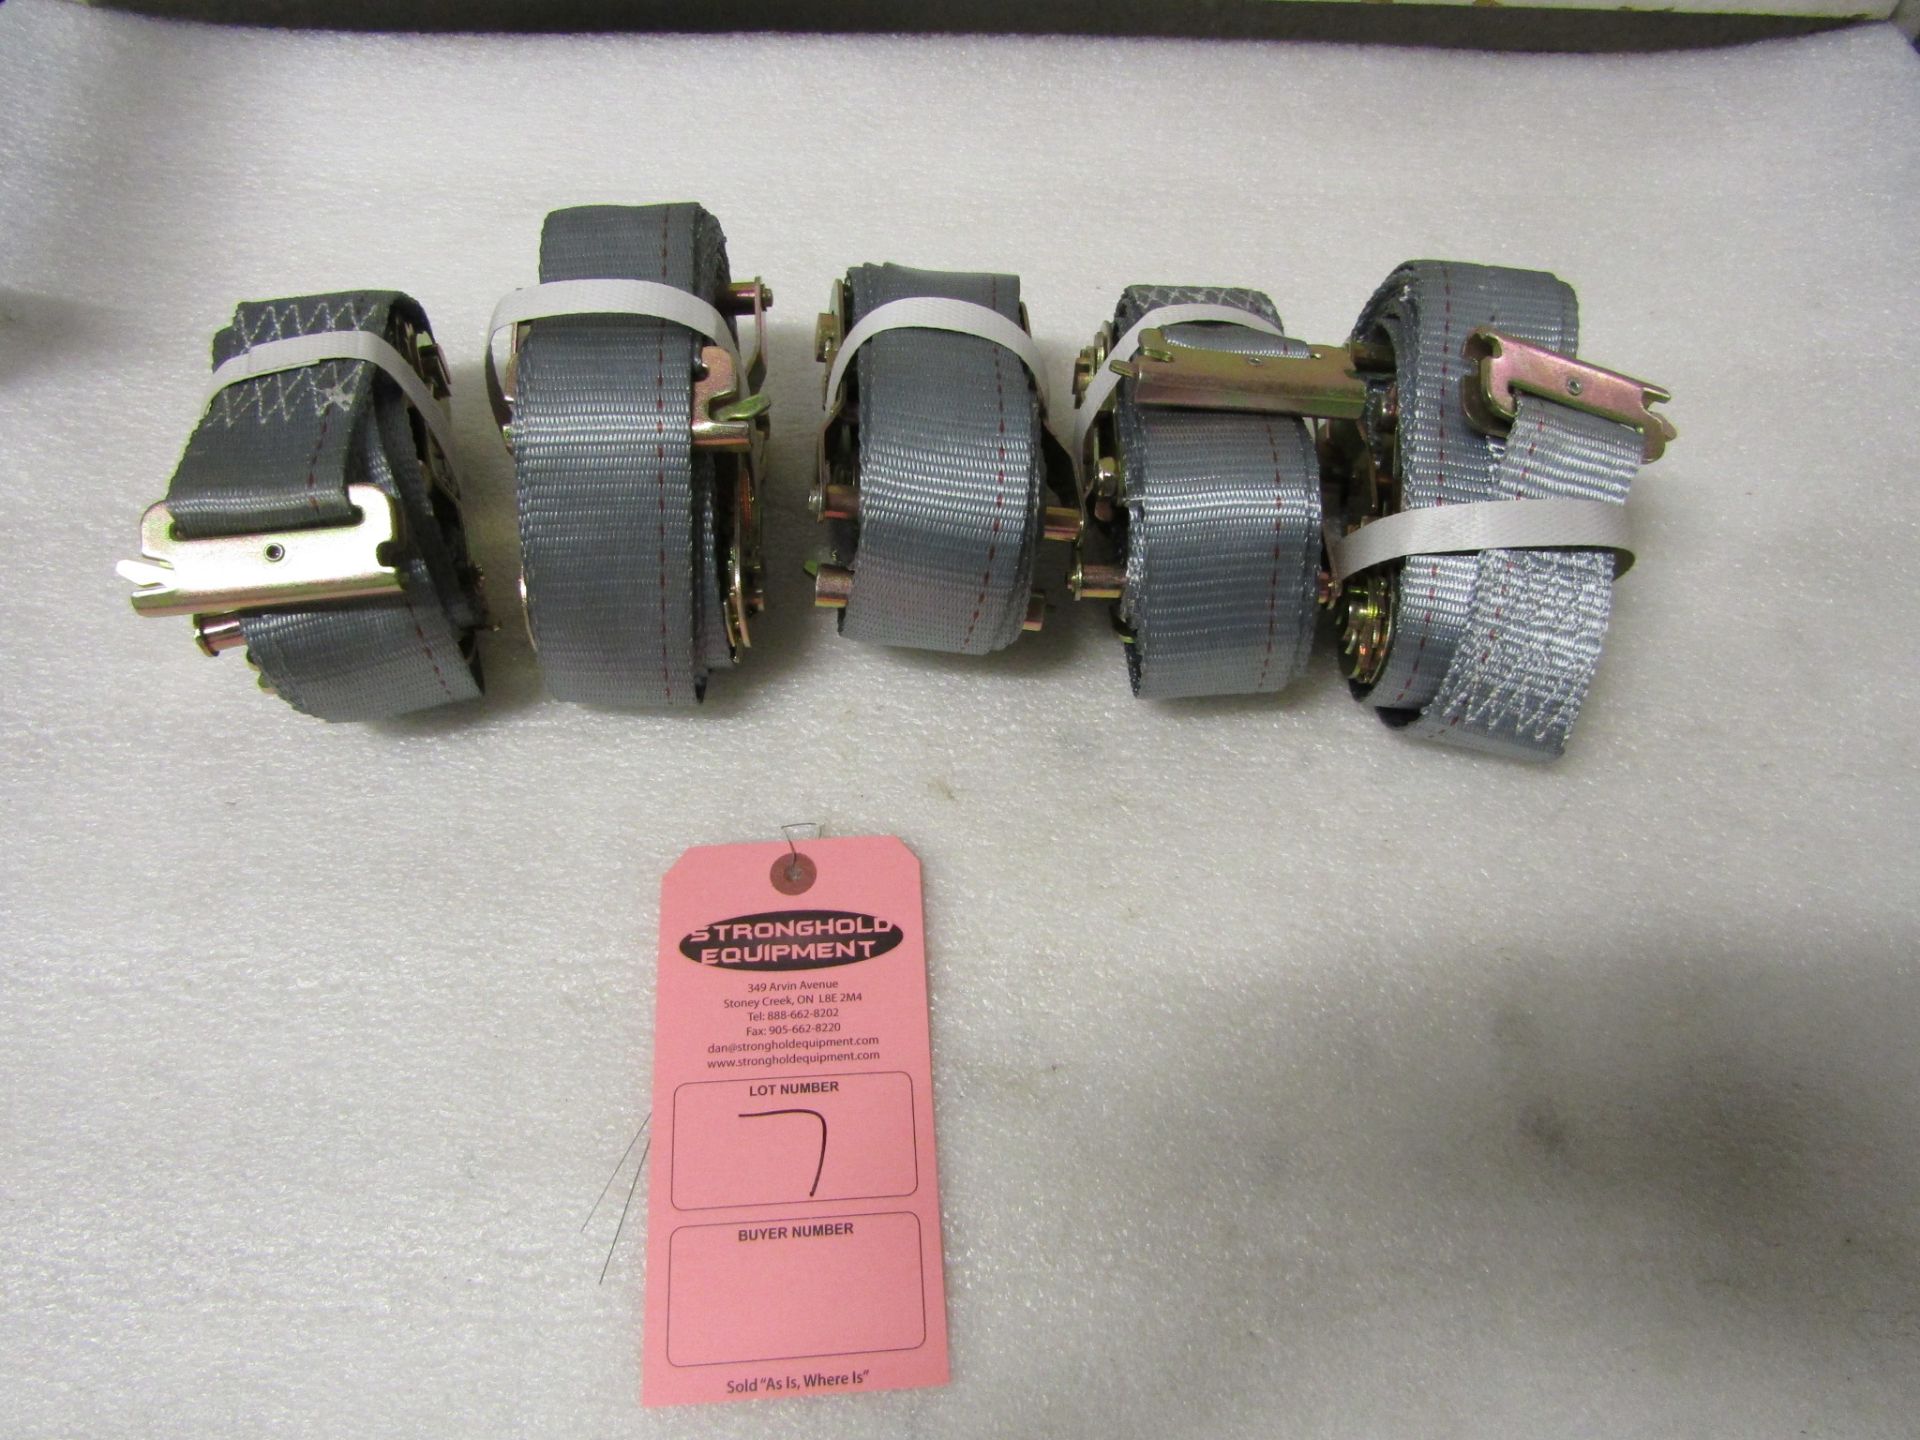 Lot of 5 (5 units) Tie Down Ratchet Straps for truck use 15' length BRAND NEW - Image 2 of 2